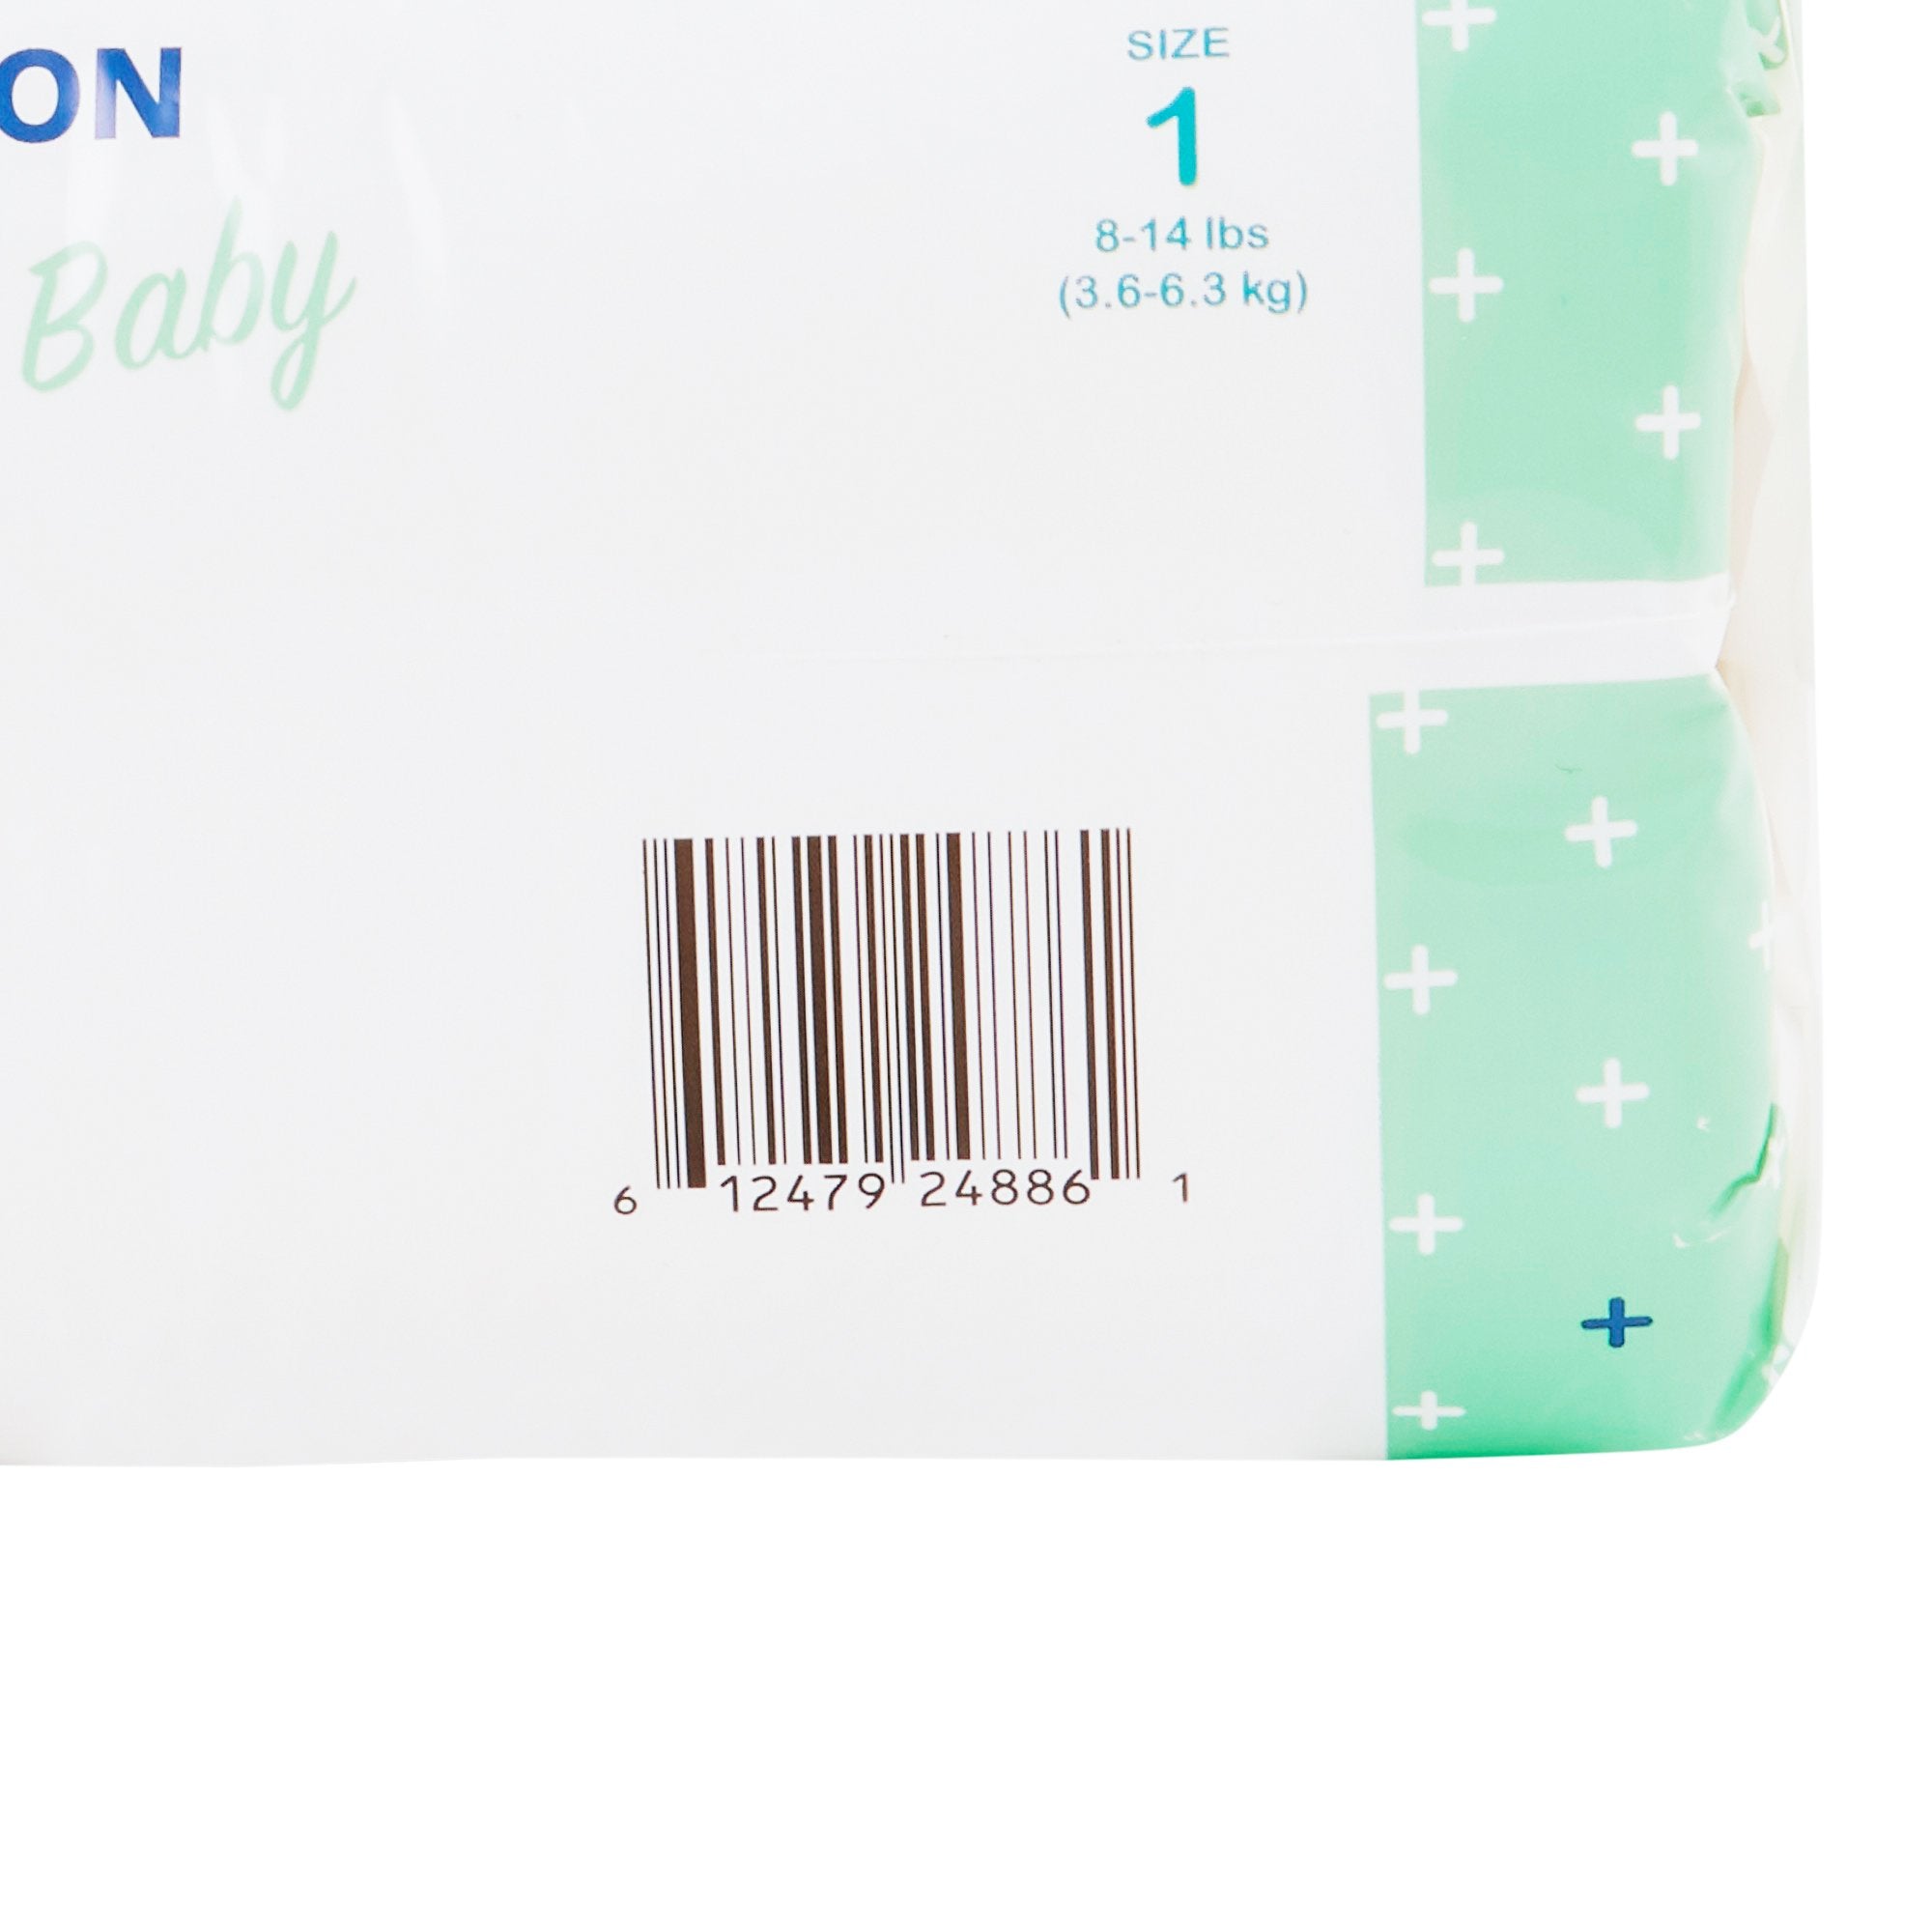 Unisex Baby Diaper McKesson Size 1 Disposable Moderate Absorbency